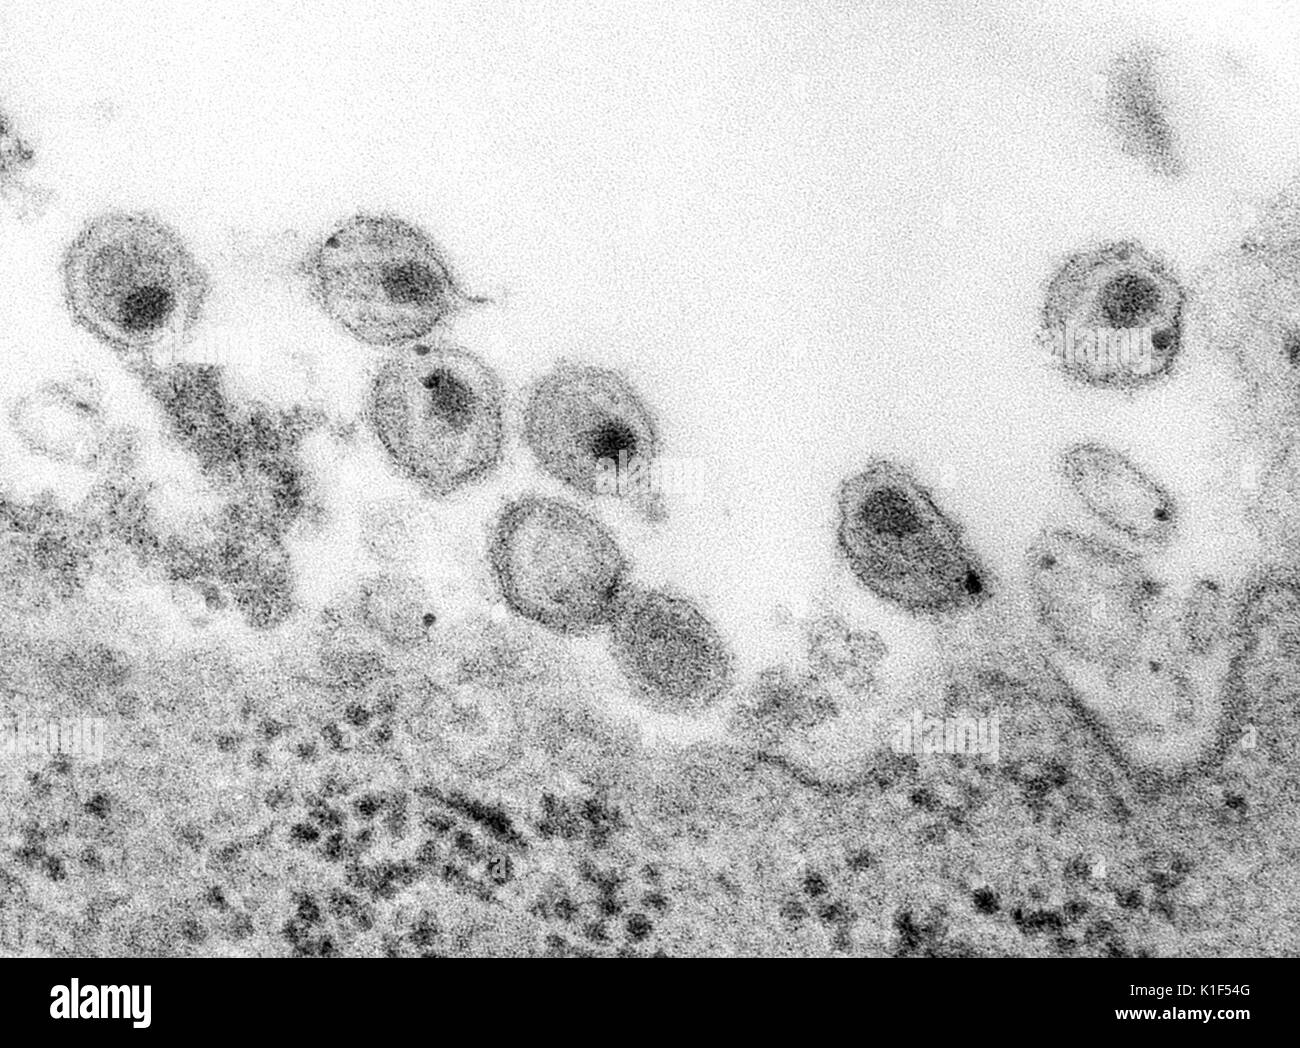 Human immunodeficiency virus (HIV), co-cultivated with human lymphocytes. See PHIL 14272, for a slightly lower magnification of this tissue sample. Image courtesy CDC/A. Harrison, P. Feorino, E. L. Palmer, 1984. Stock Photo